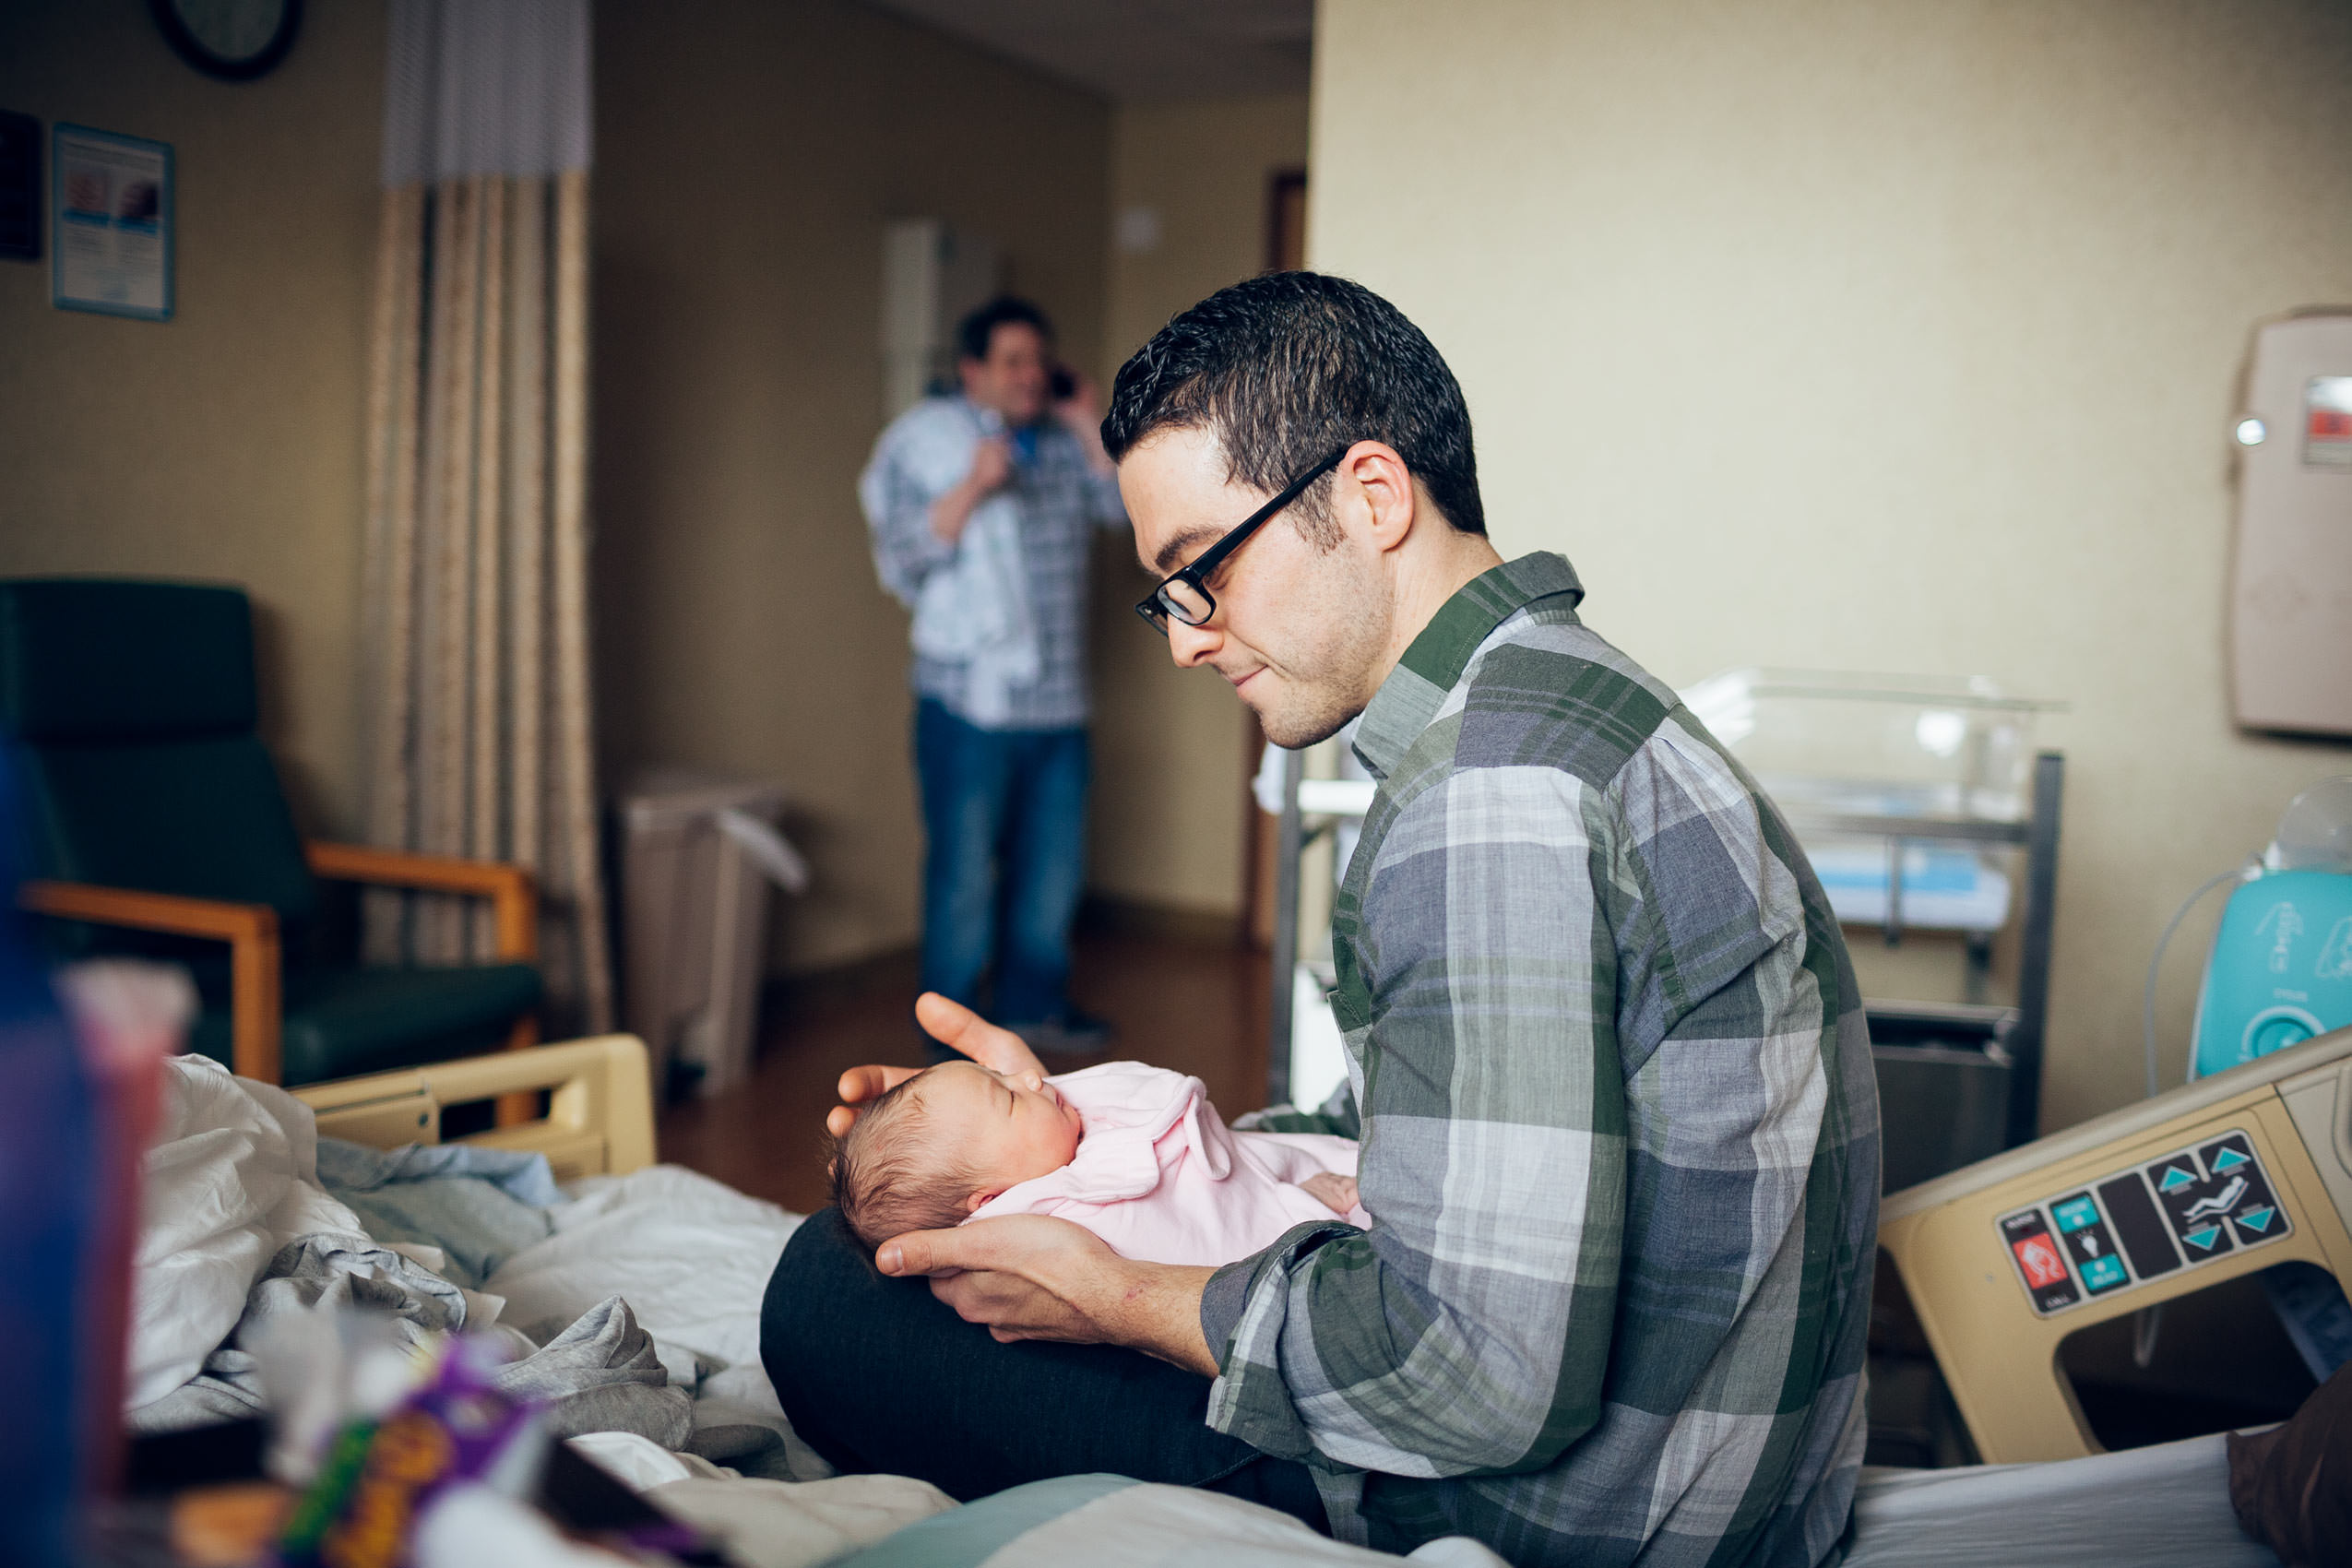 father with newborn baby in hospital for washington dc commercial photography